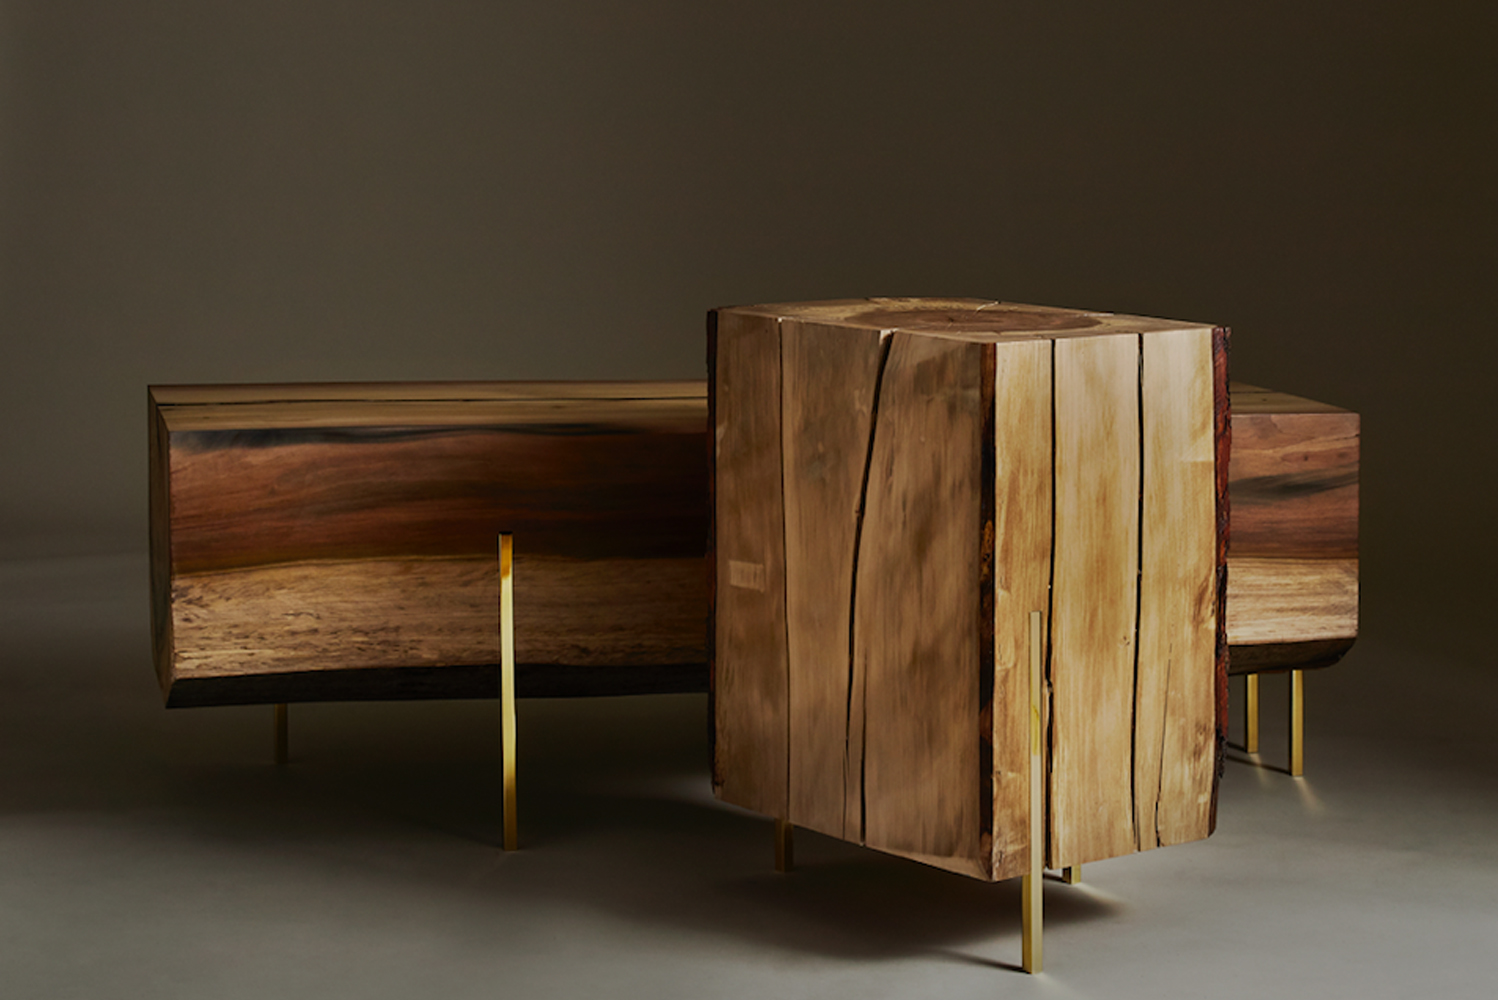 Introducing a new bench by Pelle a New York-based multidisciplinary design studio helmed by husband-wife duo Jean and Oliver